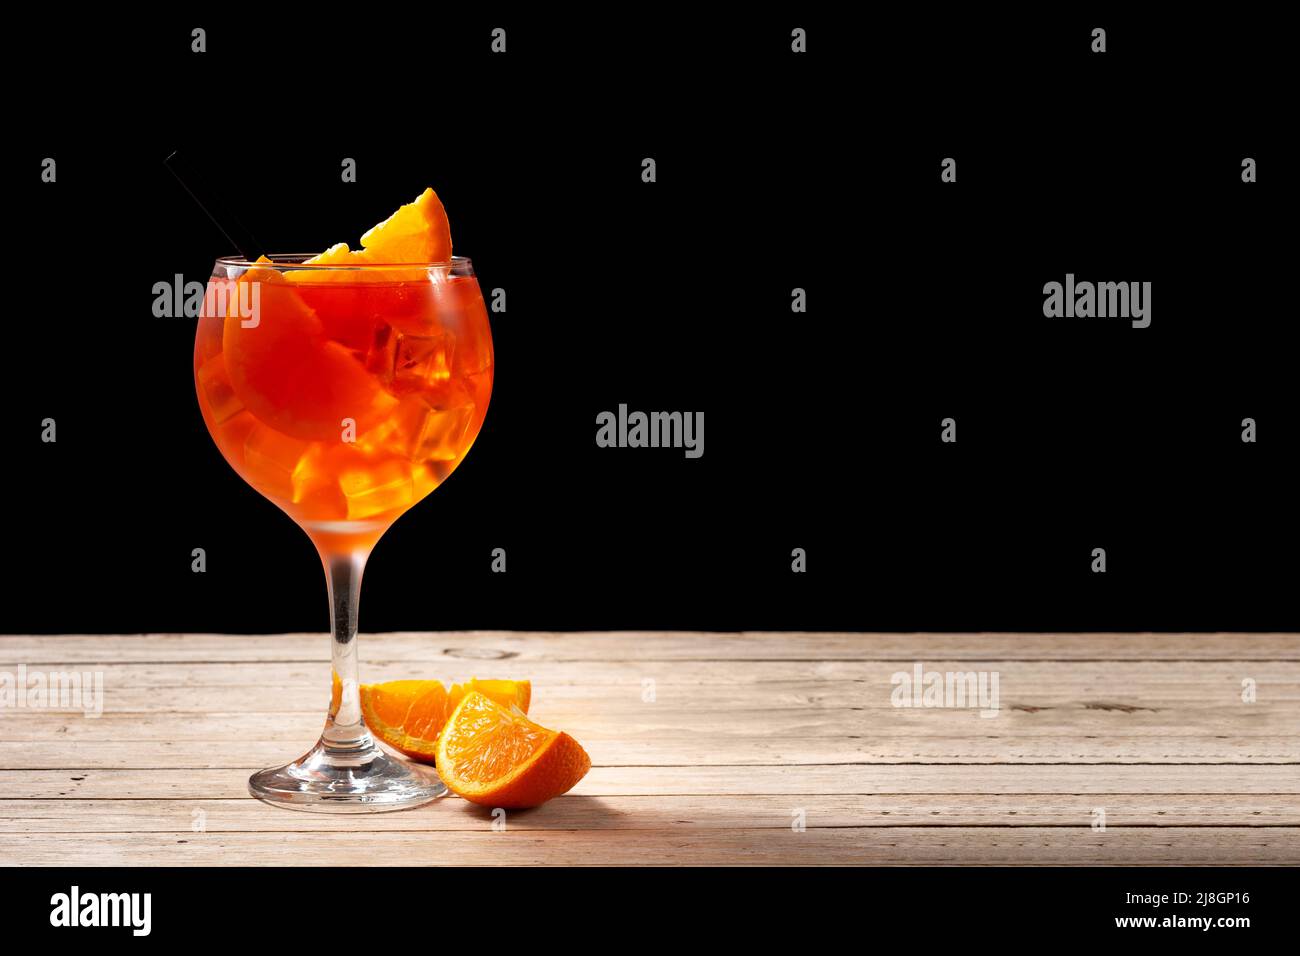 Glass of aperol spritz cocktail on wooden table Stock Photo